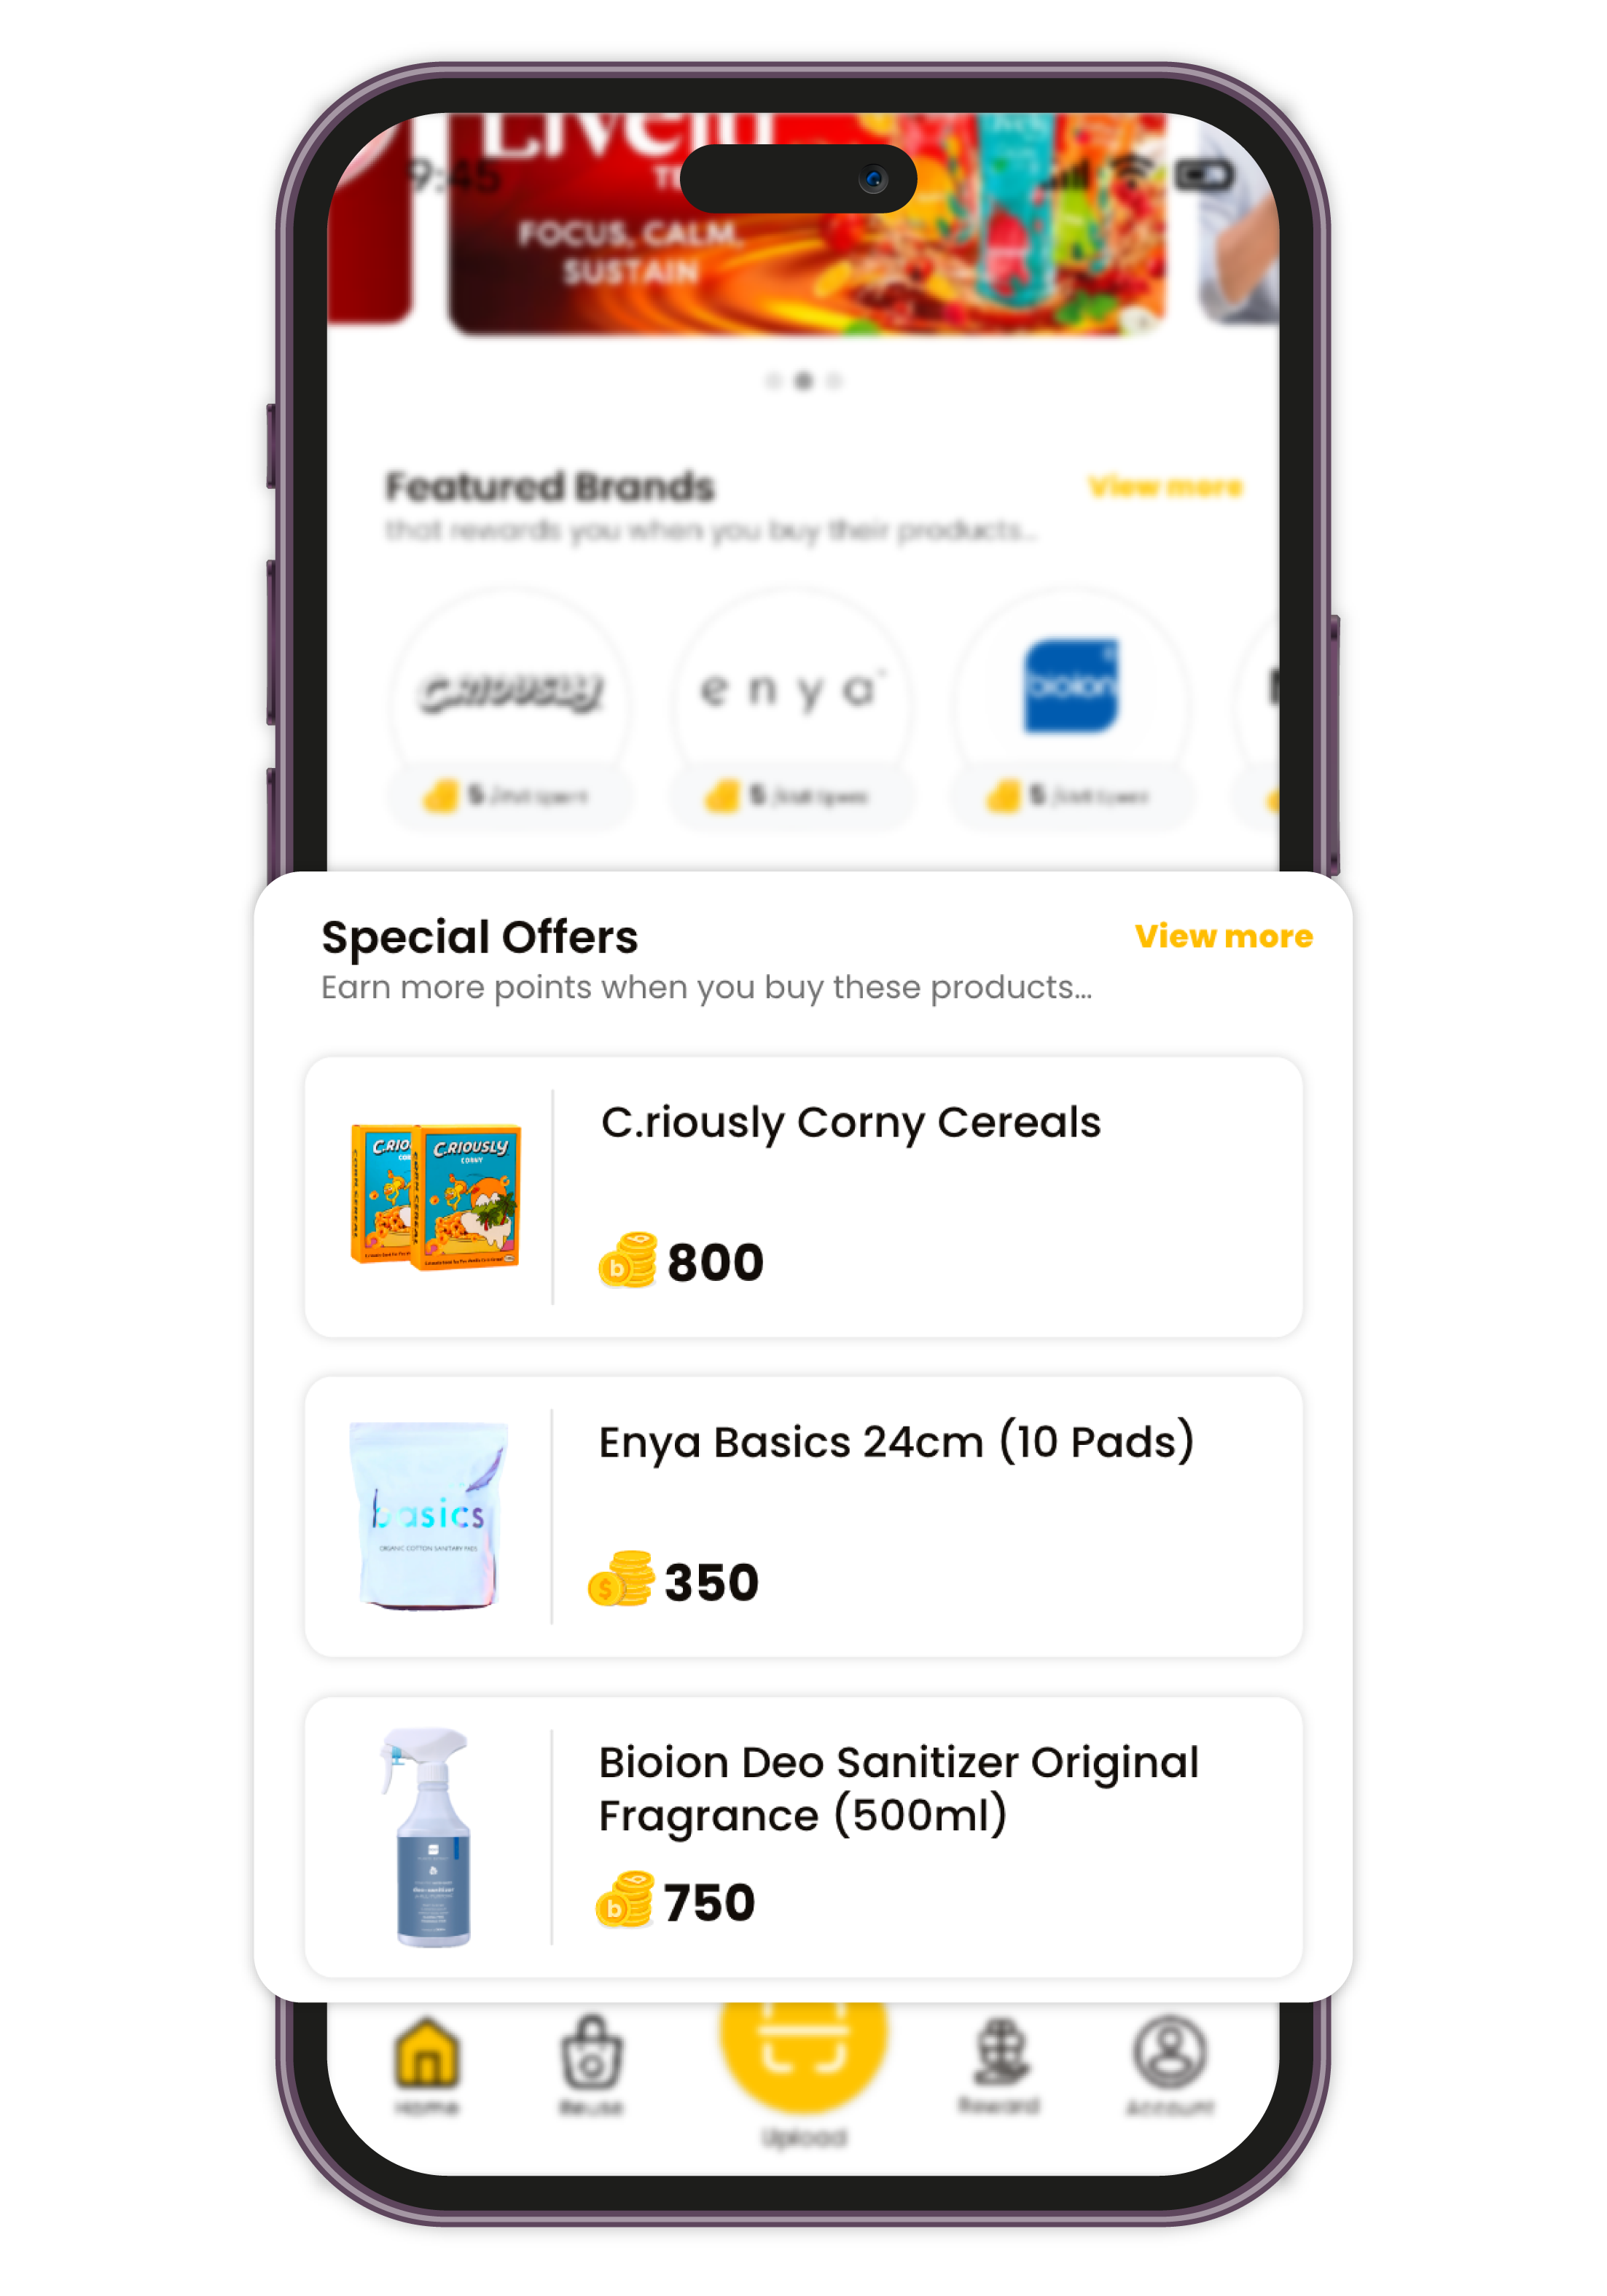 Buzz Special Offer Program where users earn cash back when they purchase the products featured as Special Offers. Users can purchase the product in any store they go to (no limitation), and once they purchase the products, they simply have to upload the purchase receipt into the Buzz App to collect the Cash Back in the form of Buzz Points.